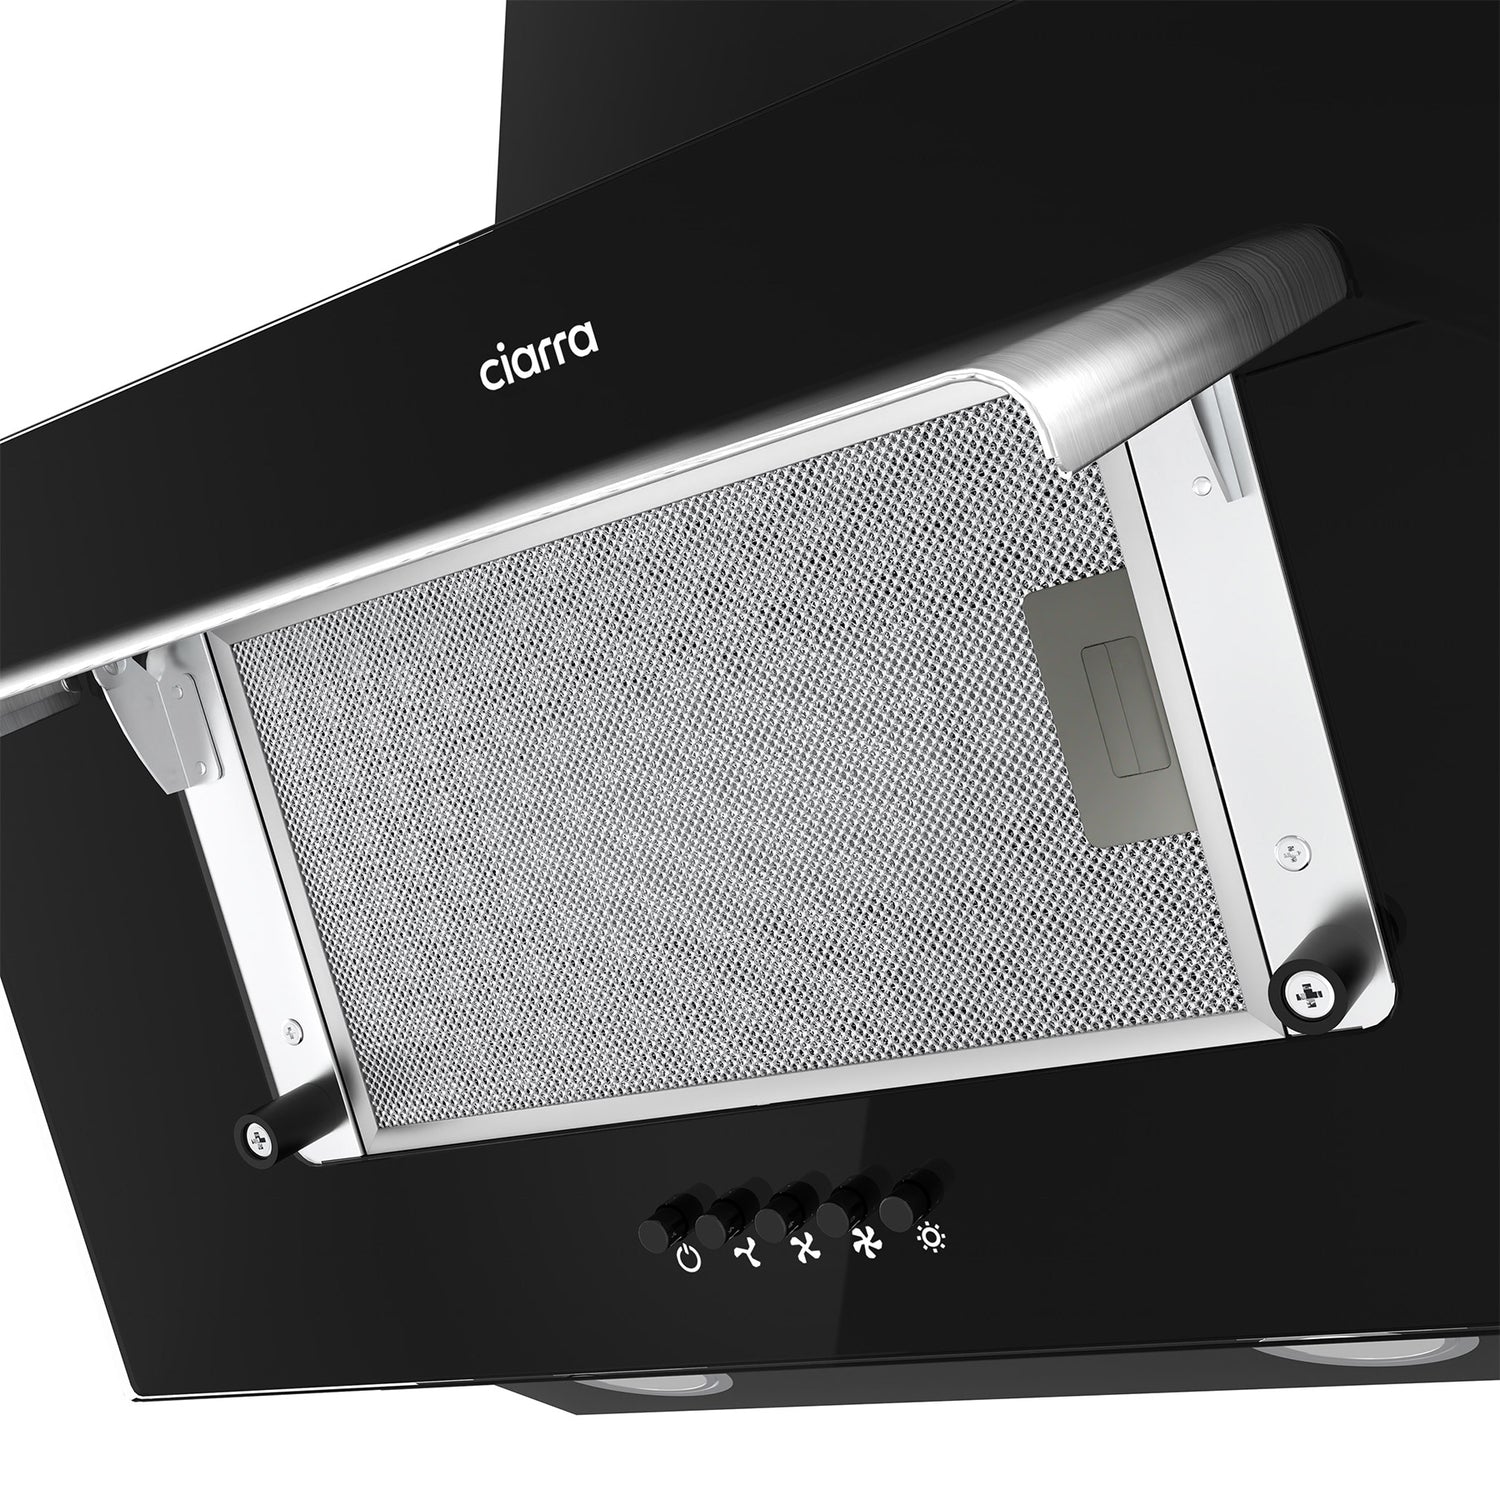 CIARRA 60cm Angled Wall Mounted Cooker Hood CBCB6736D-OW